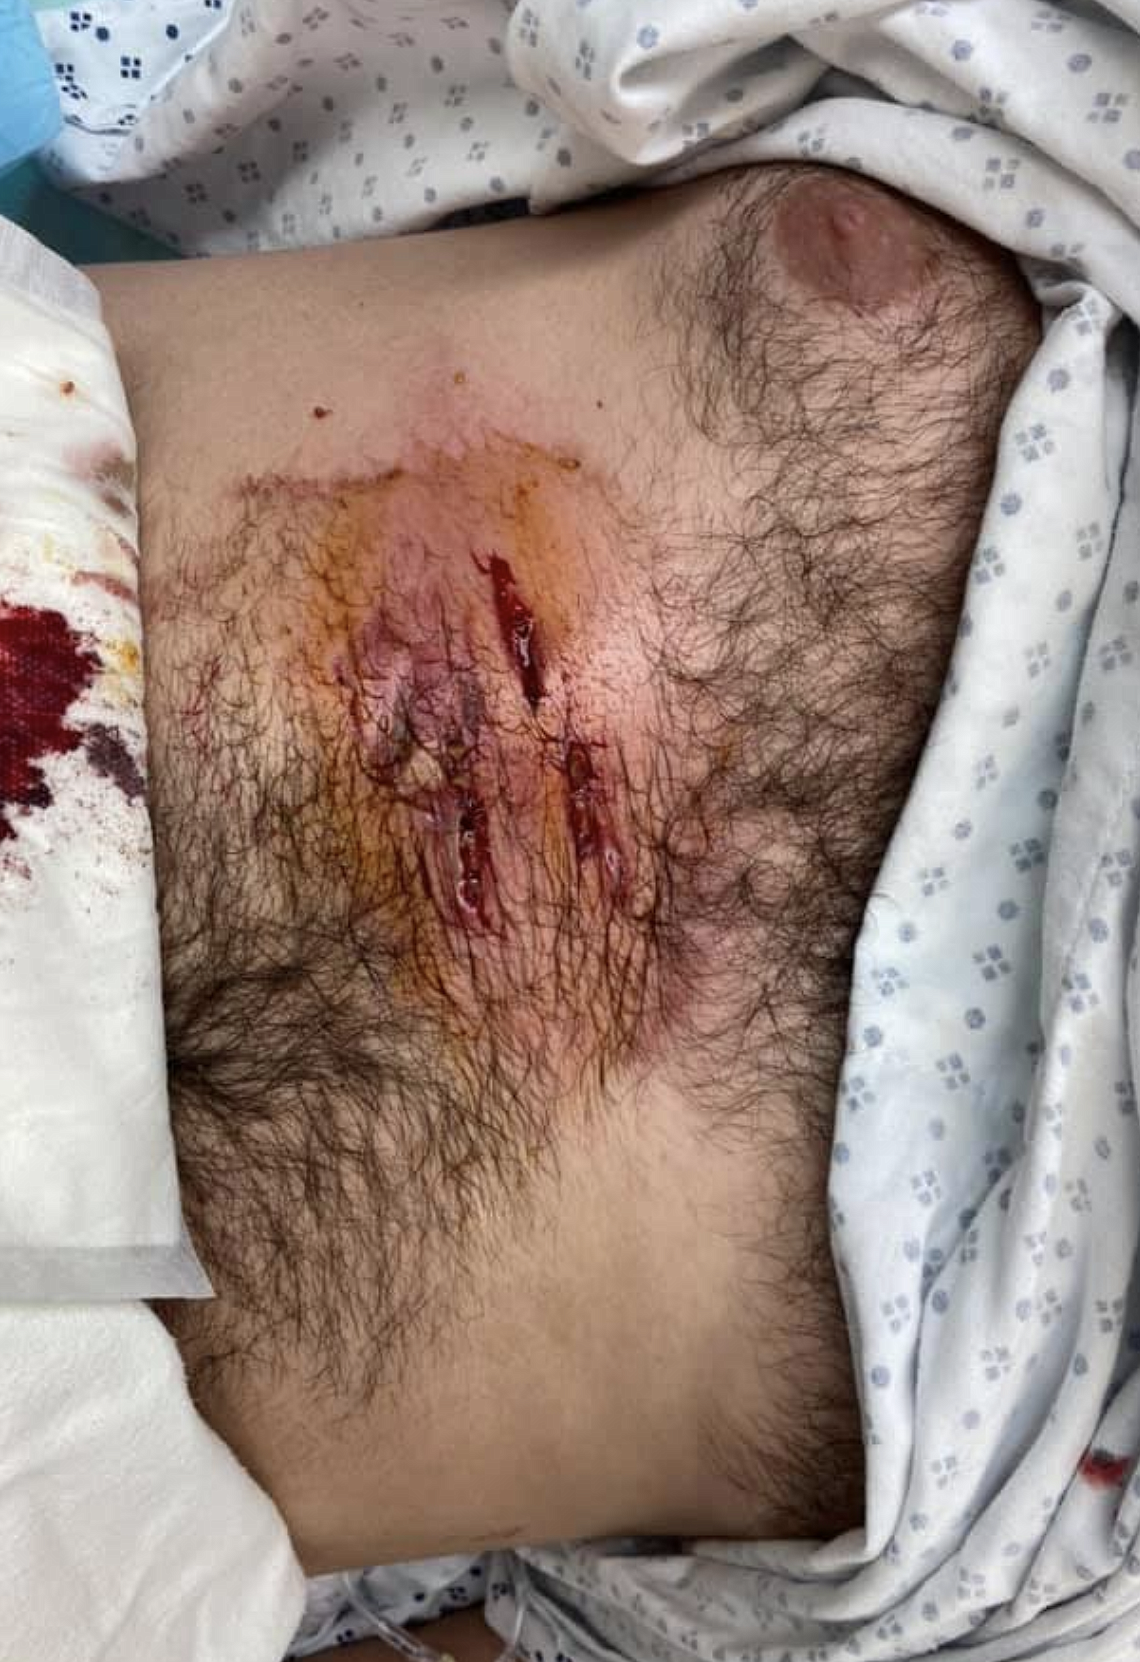 The bite marks Todd Newell Jr. received after the injured cougar latched onto his chest. These injuries and the others he received were all non-life threatening.